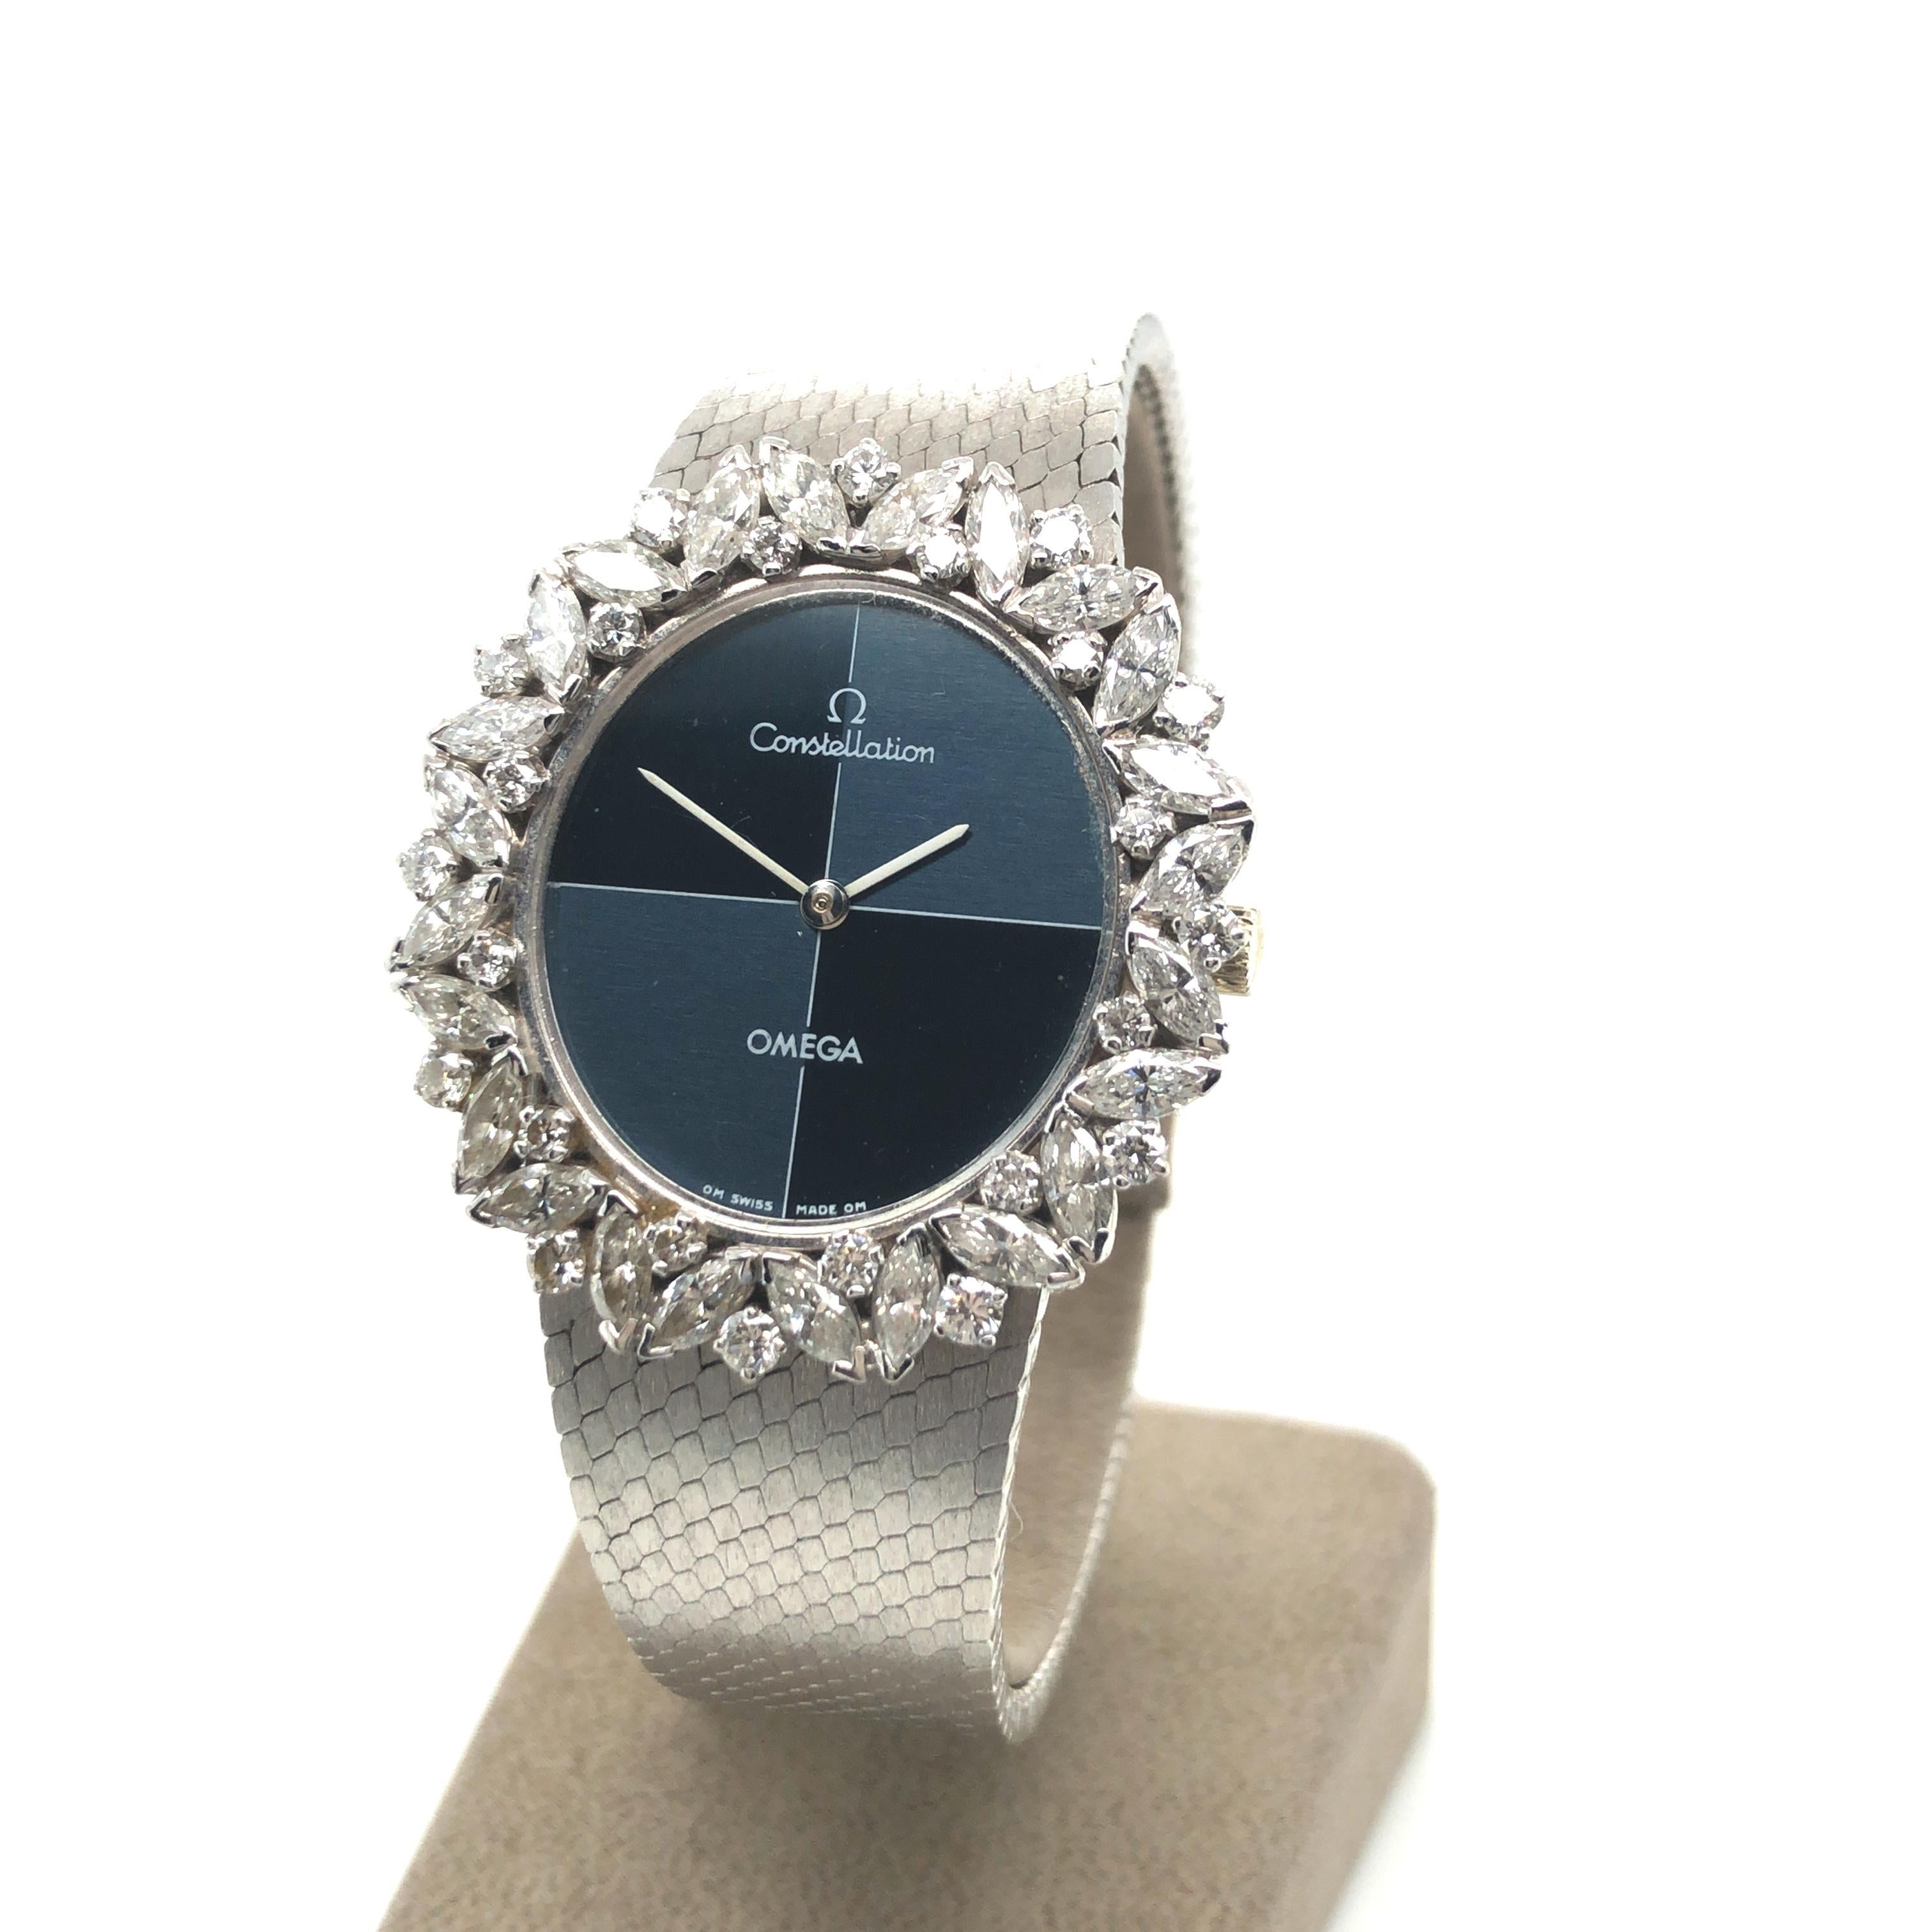 The Constellation is one of Omegas oldest collections.
This one is a very beautiful example, the bezel is set with 24 marquise-cut diamonds and 24 brilliant-cut diamonds totalling 1.80 ct. The colour of the dial quarters is depending on the